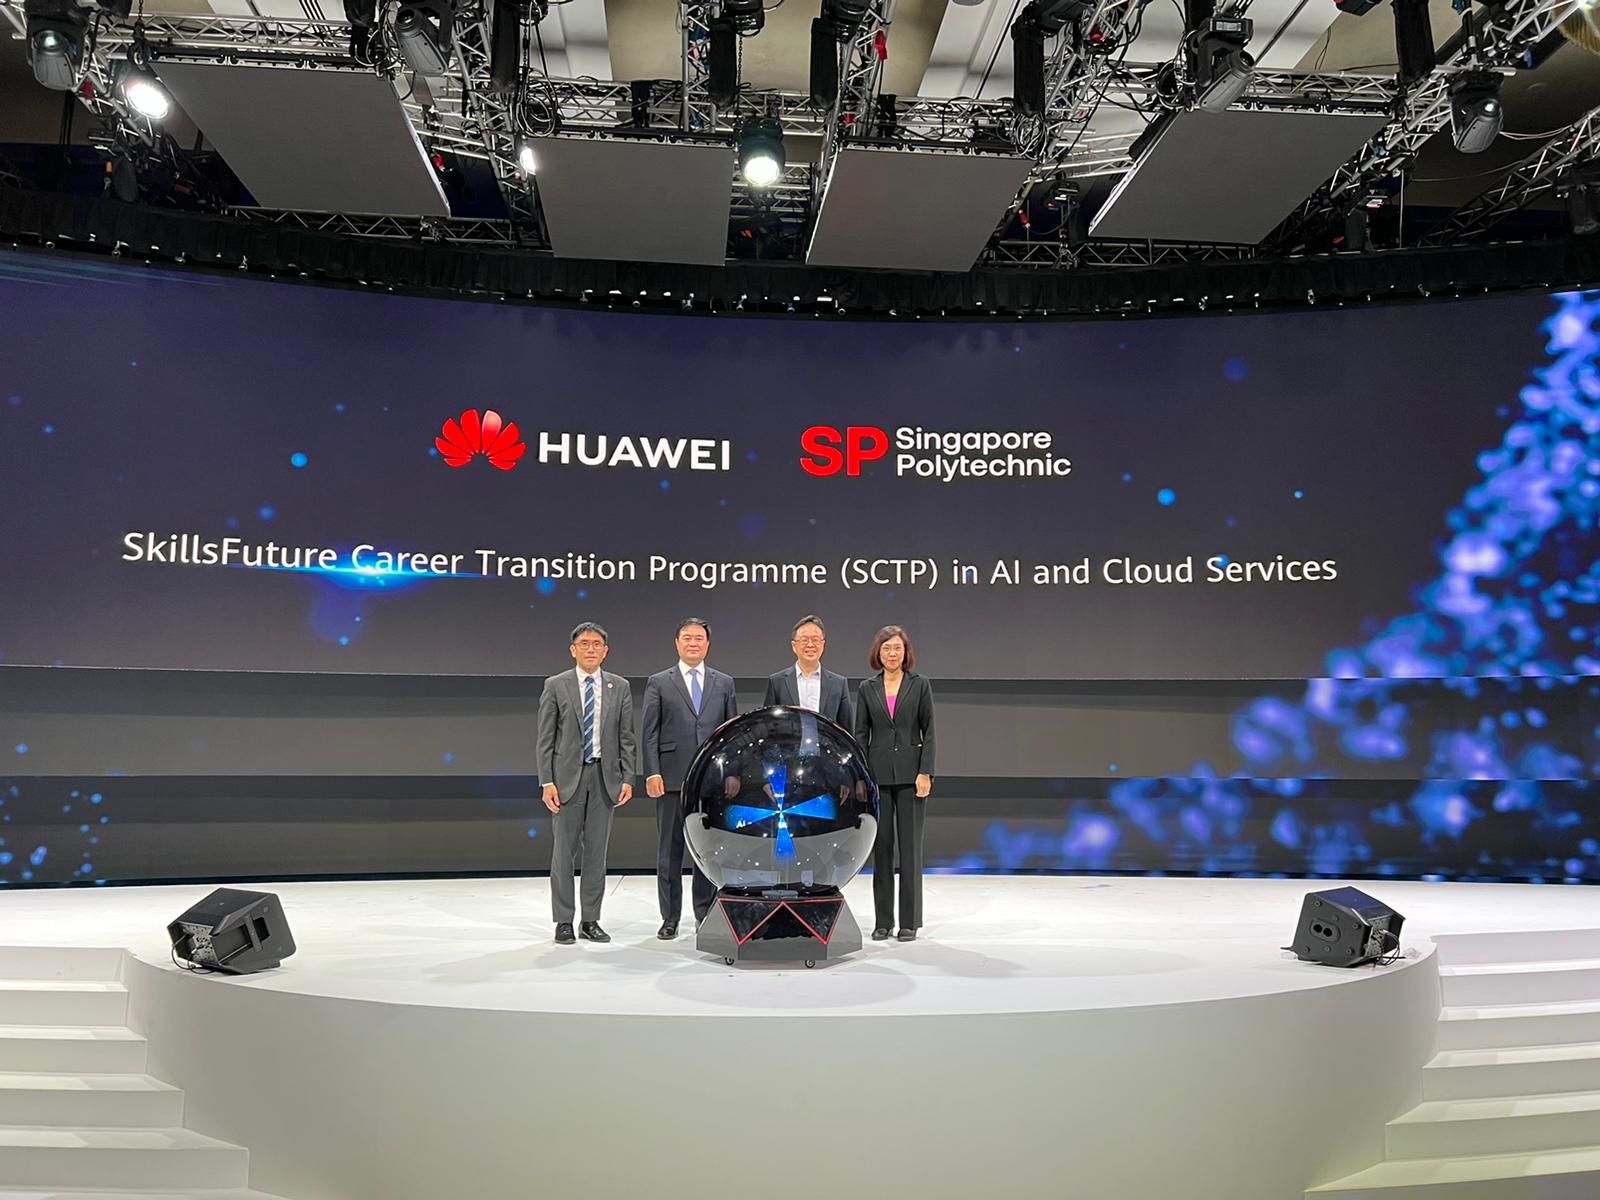 Collaboration between Singapore Polytechnic and Huawei